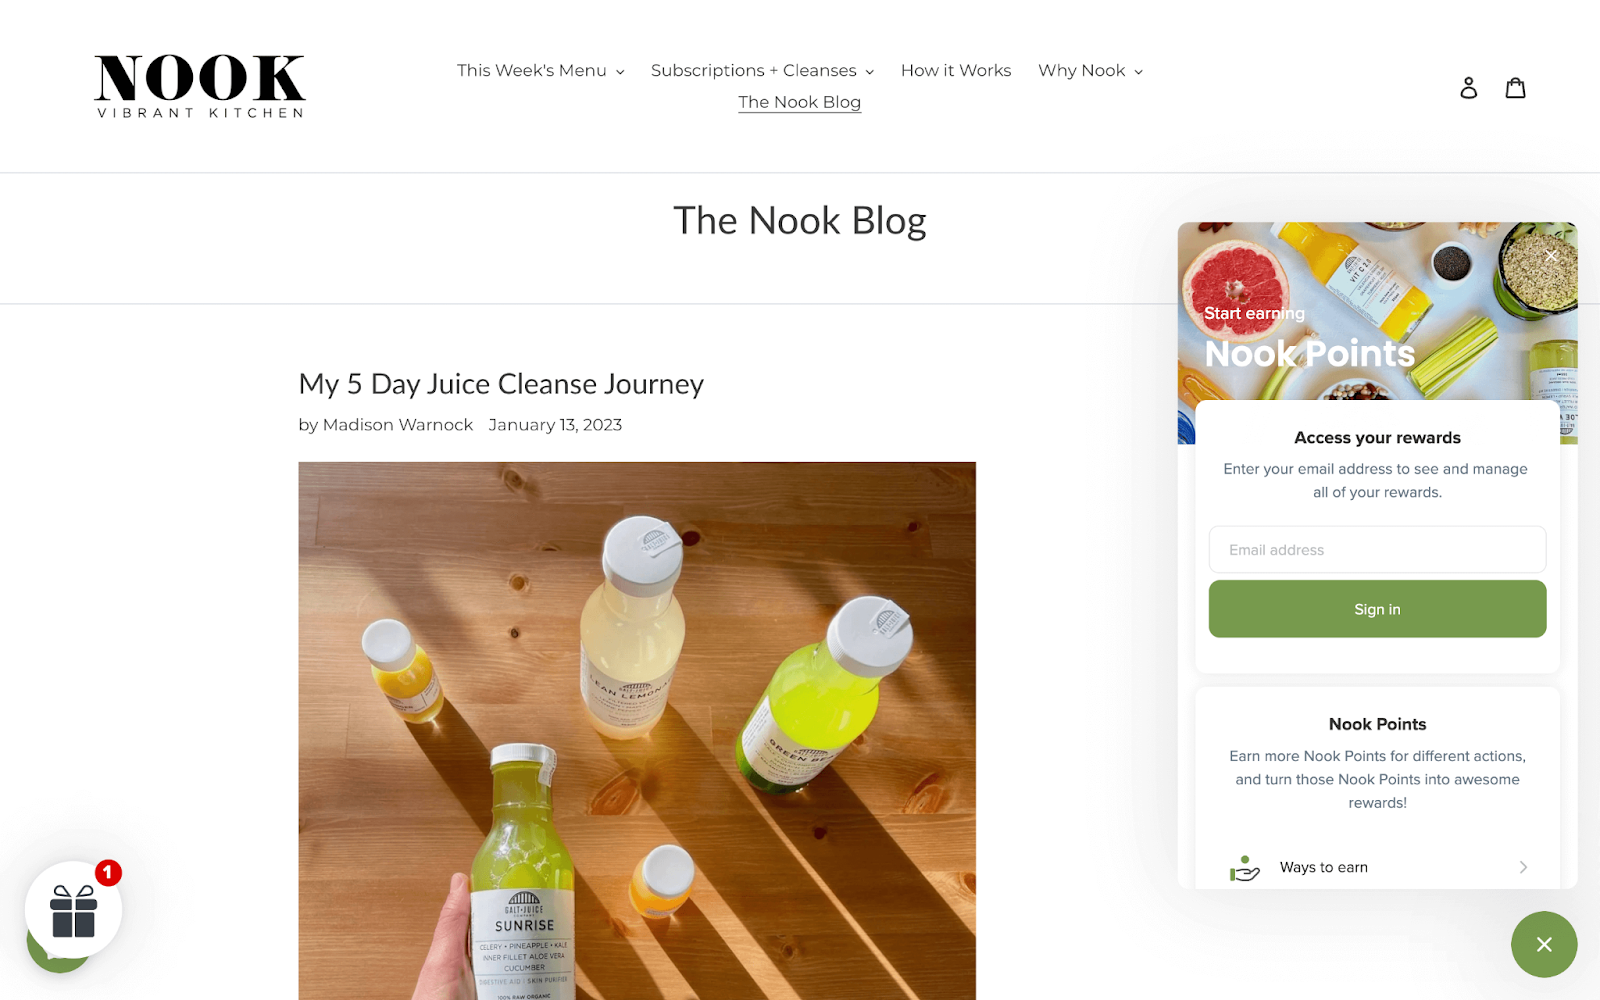 Nook Vibrant Kitchen–A screenshot from Nook’s website. The page is The Nook Blog and shows an article titled, “My 5 Day Juice Cleanse Journey”. The featured image is 5 multicolored bottles of juice on a wooden table. On the right side of the image is Nook’s rewards panel, which shows the title ‘Nook Points’ and has two sections visible: the sign-in bar and the points program explainer showing ways to earn and ways to redeem. 